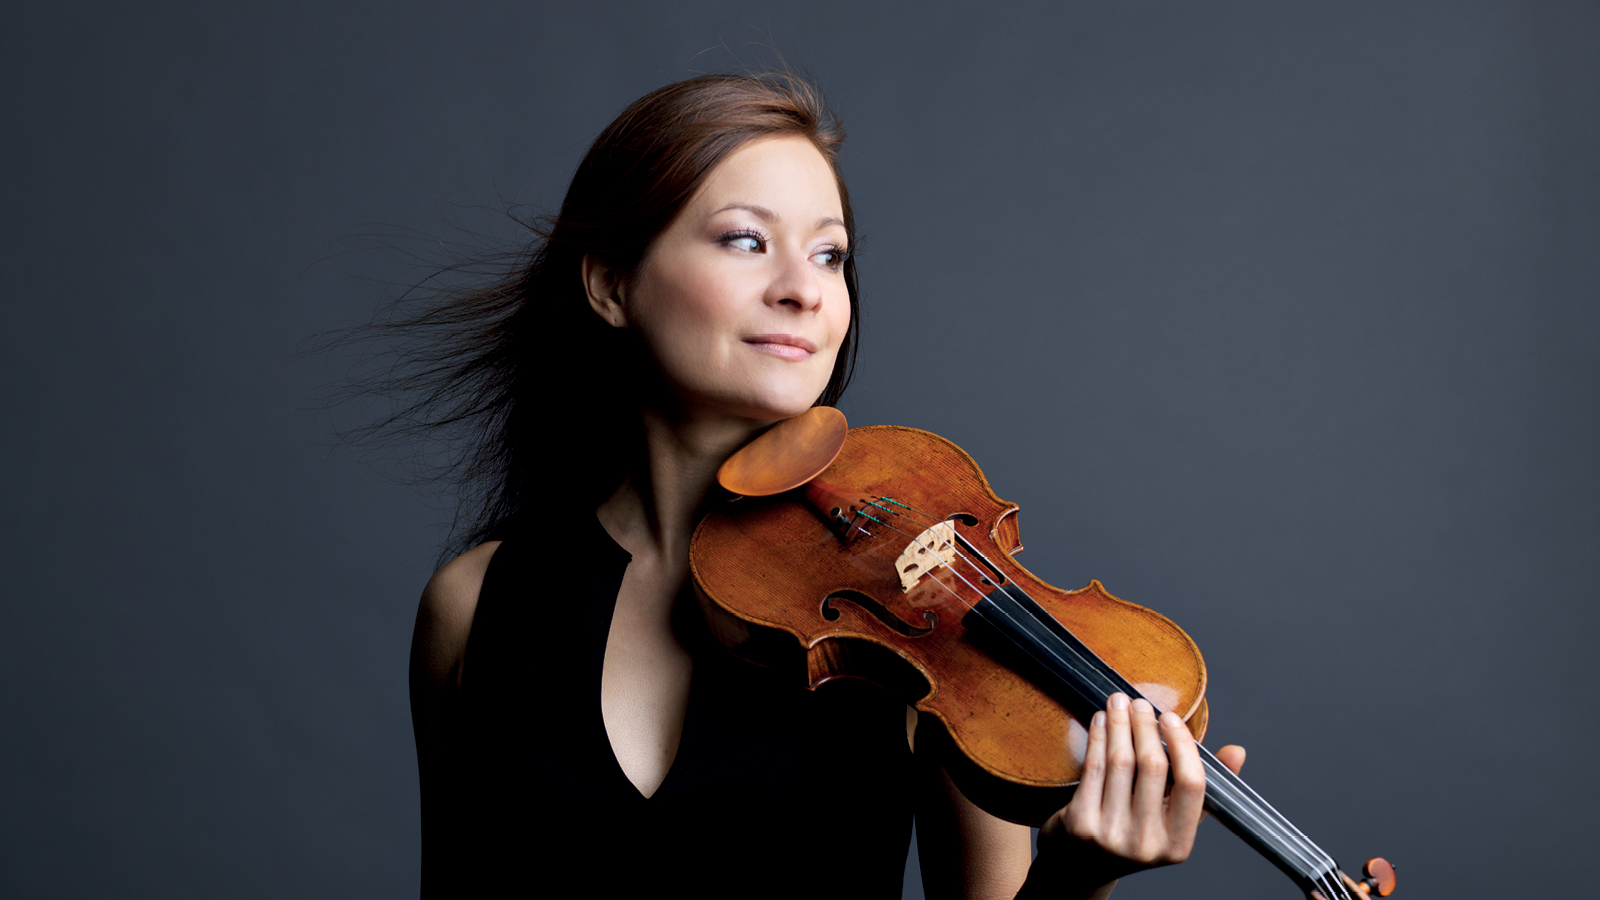 A woman with brown hairs holding a violin.